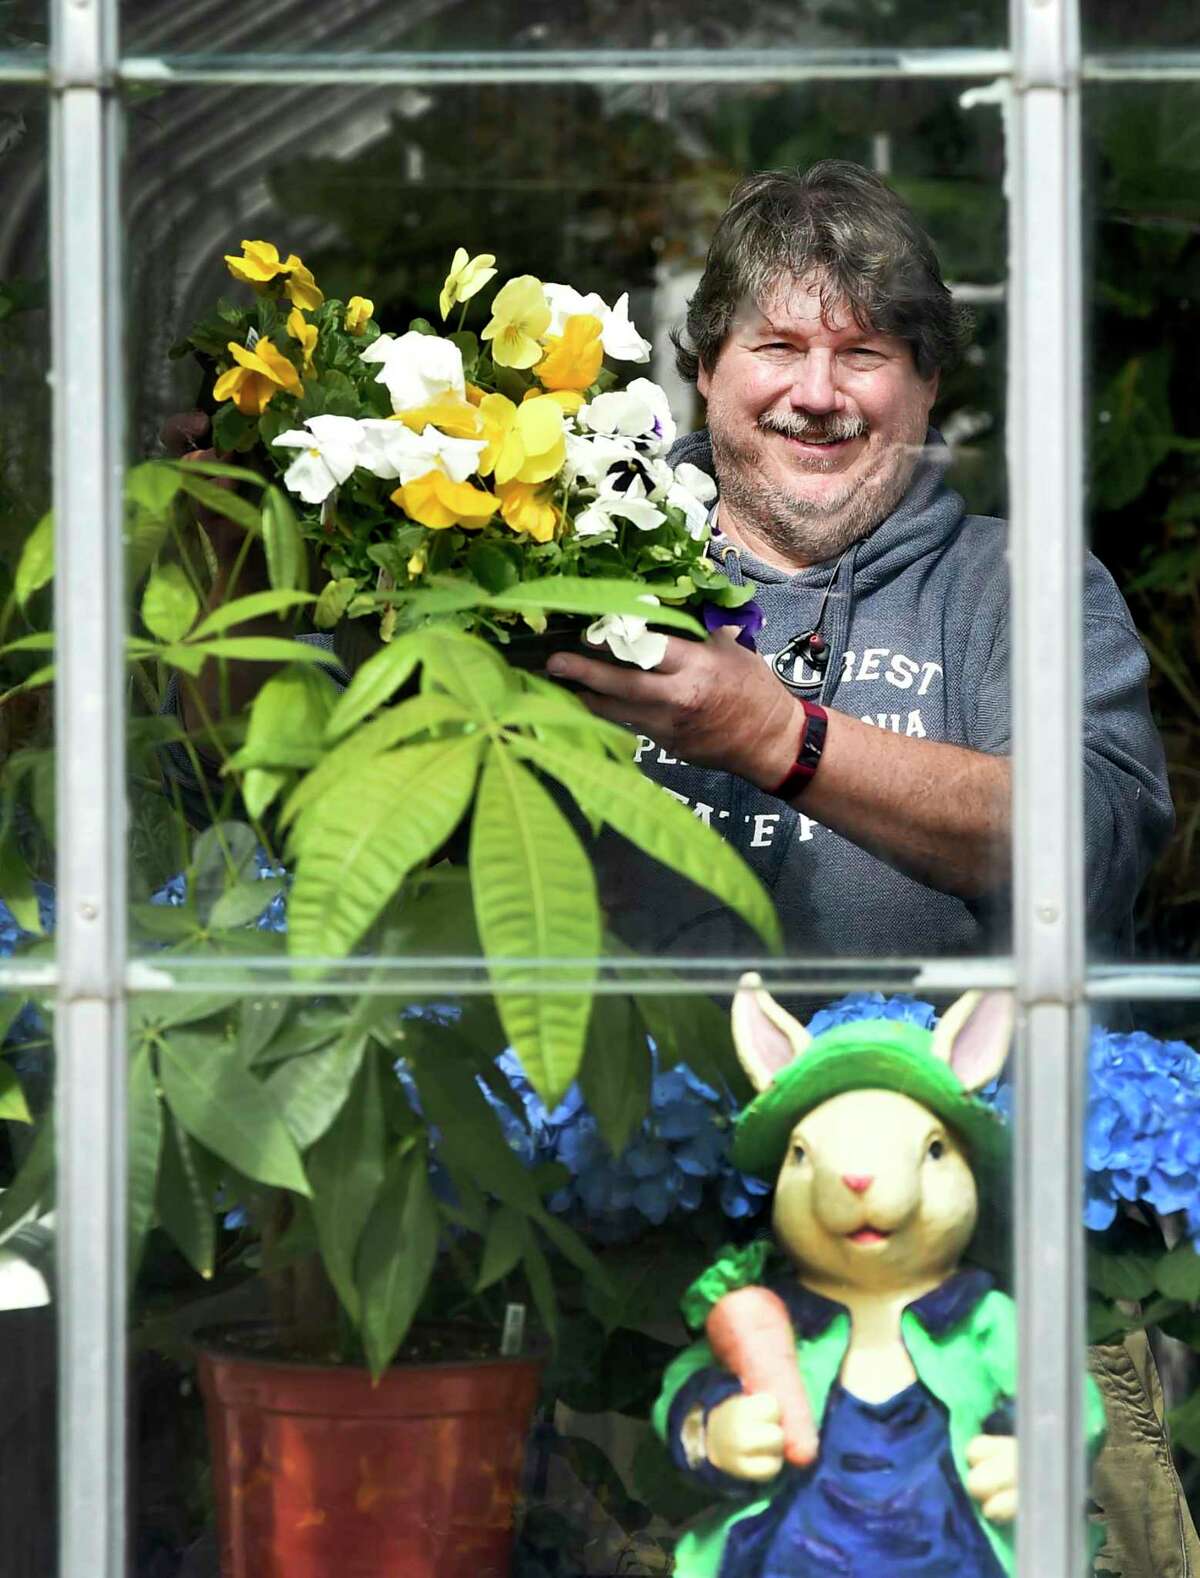 Scott Hickman, executive director of the G.R.O.W.E.R.S. program (Growing Real Opportunities With Education Relationships & Stability) at Edgerton Park in New Haven on April 2, 2020 with his plants and flowers. Despite the coronavirus, he is keeping his retail greenhouse operating on limited hours and will sell flowers and plants for Easter soon.